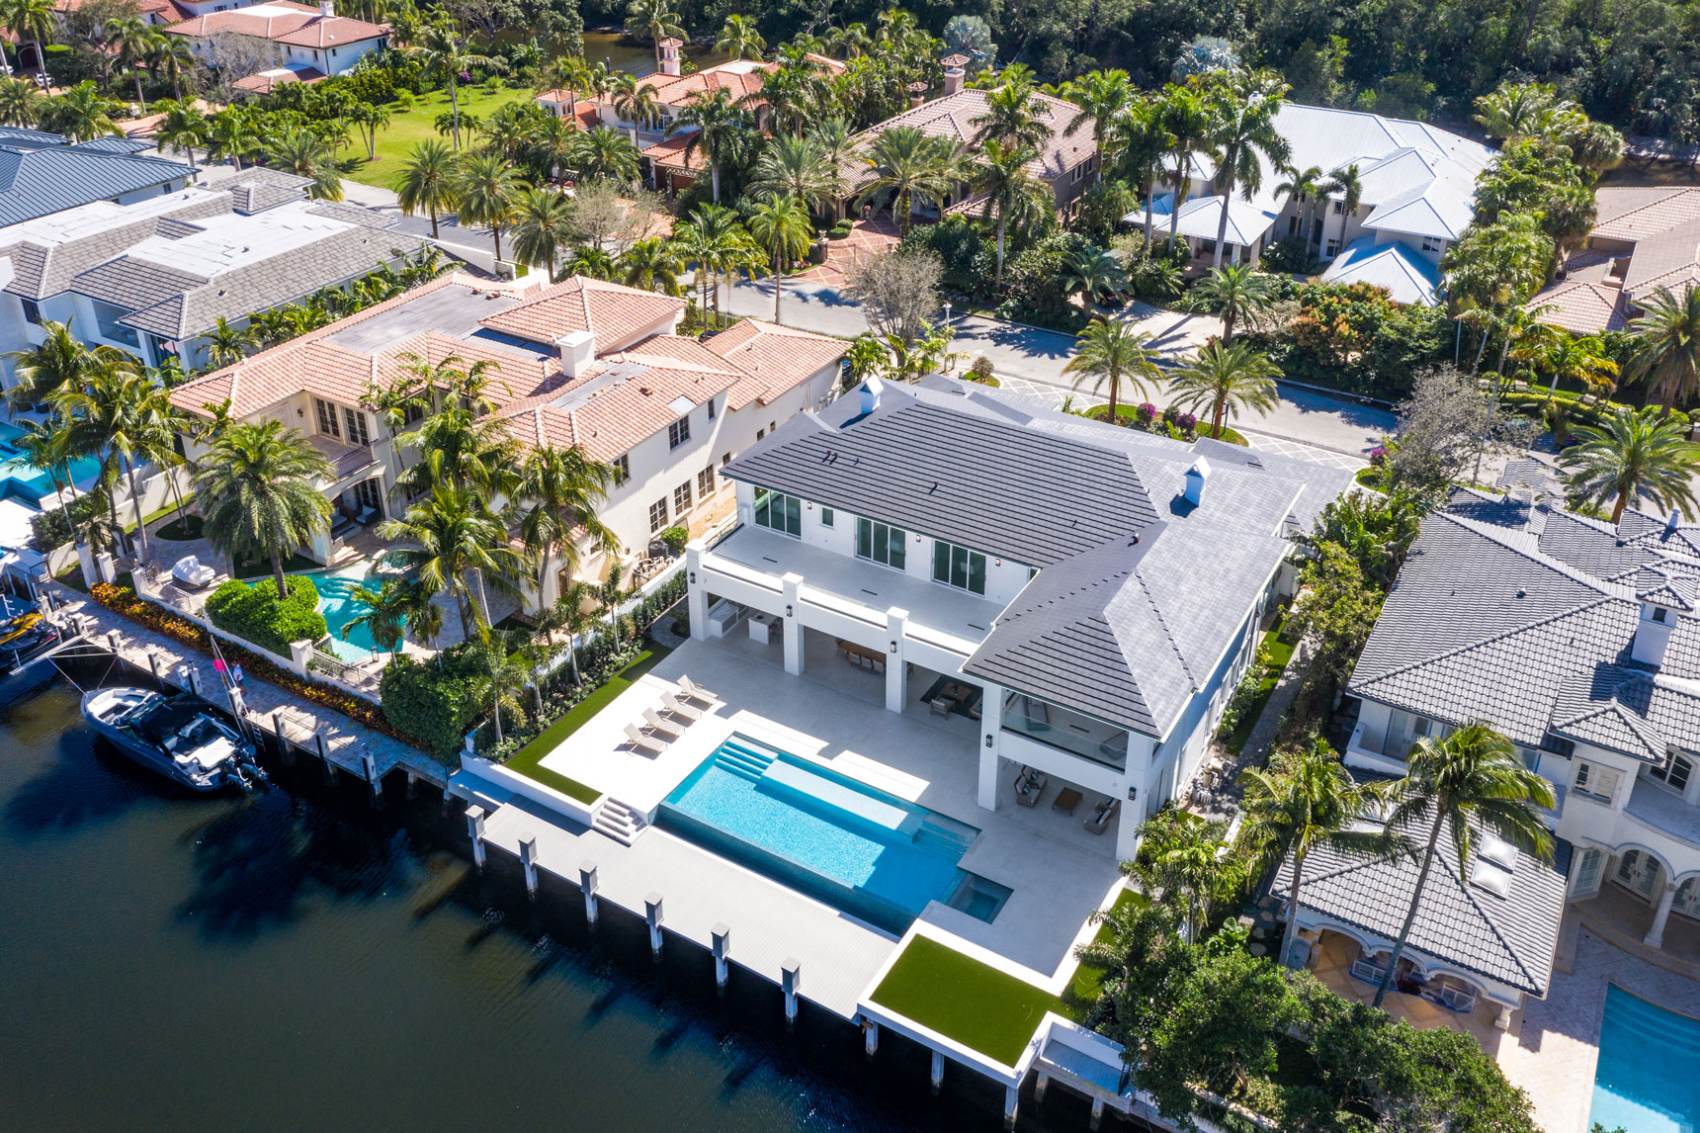 A large white house with pool and dock.